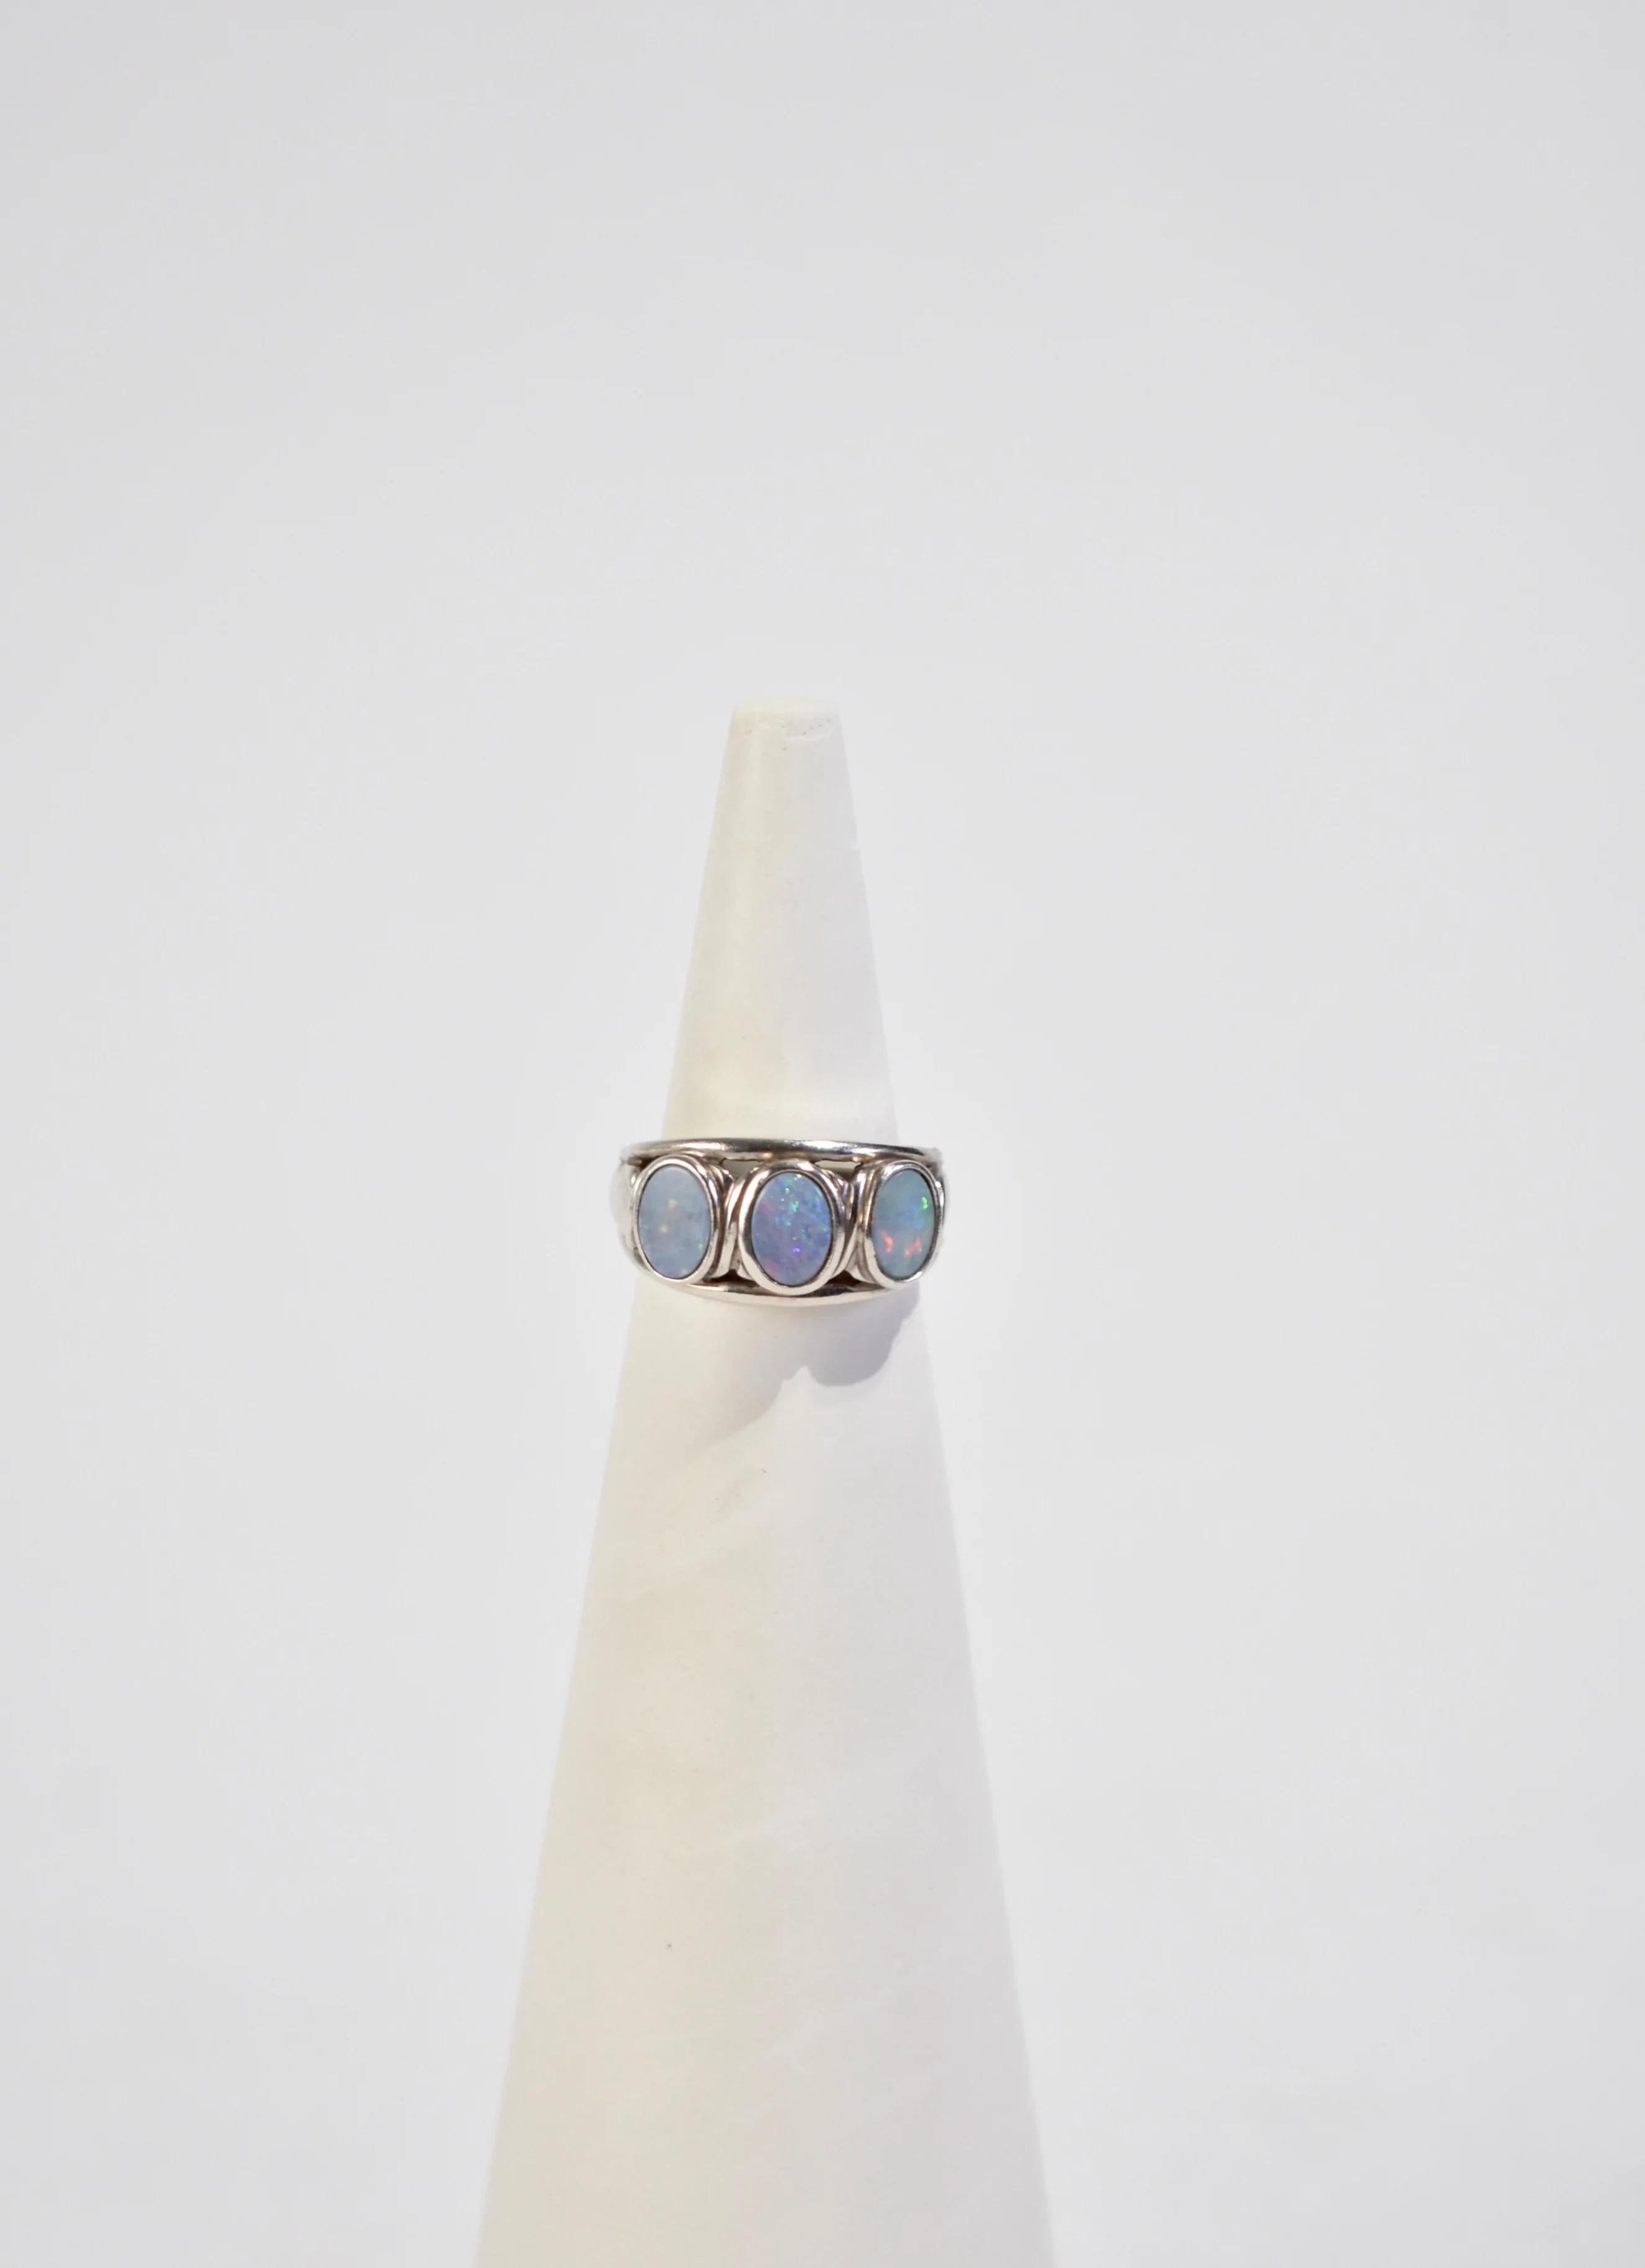 Vintage sterling ring with three opal cabochons. Stamped 925.

Material: Sterling silver, opal.

